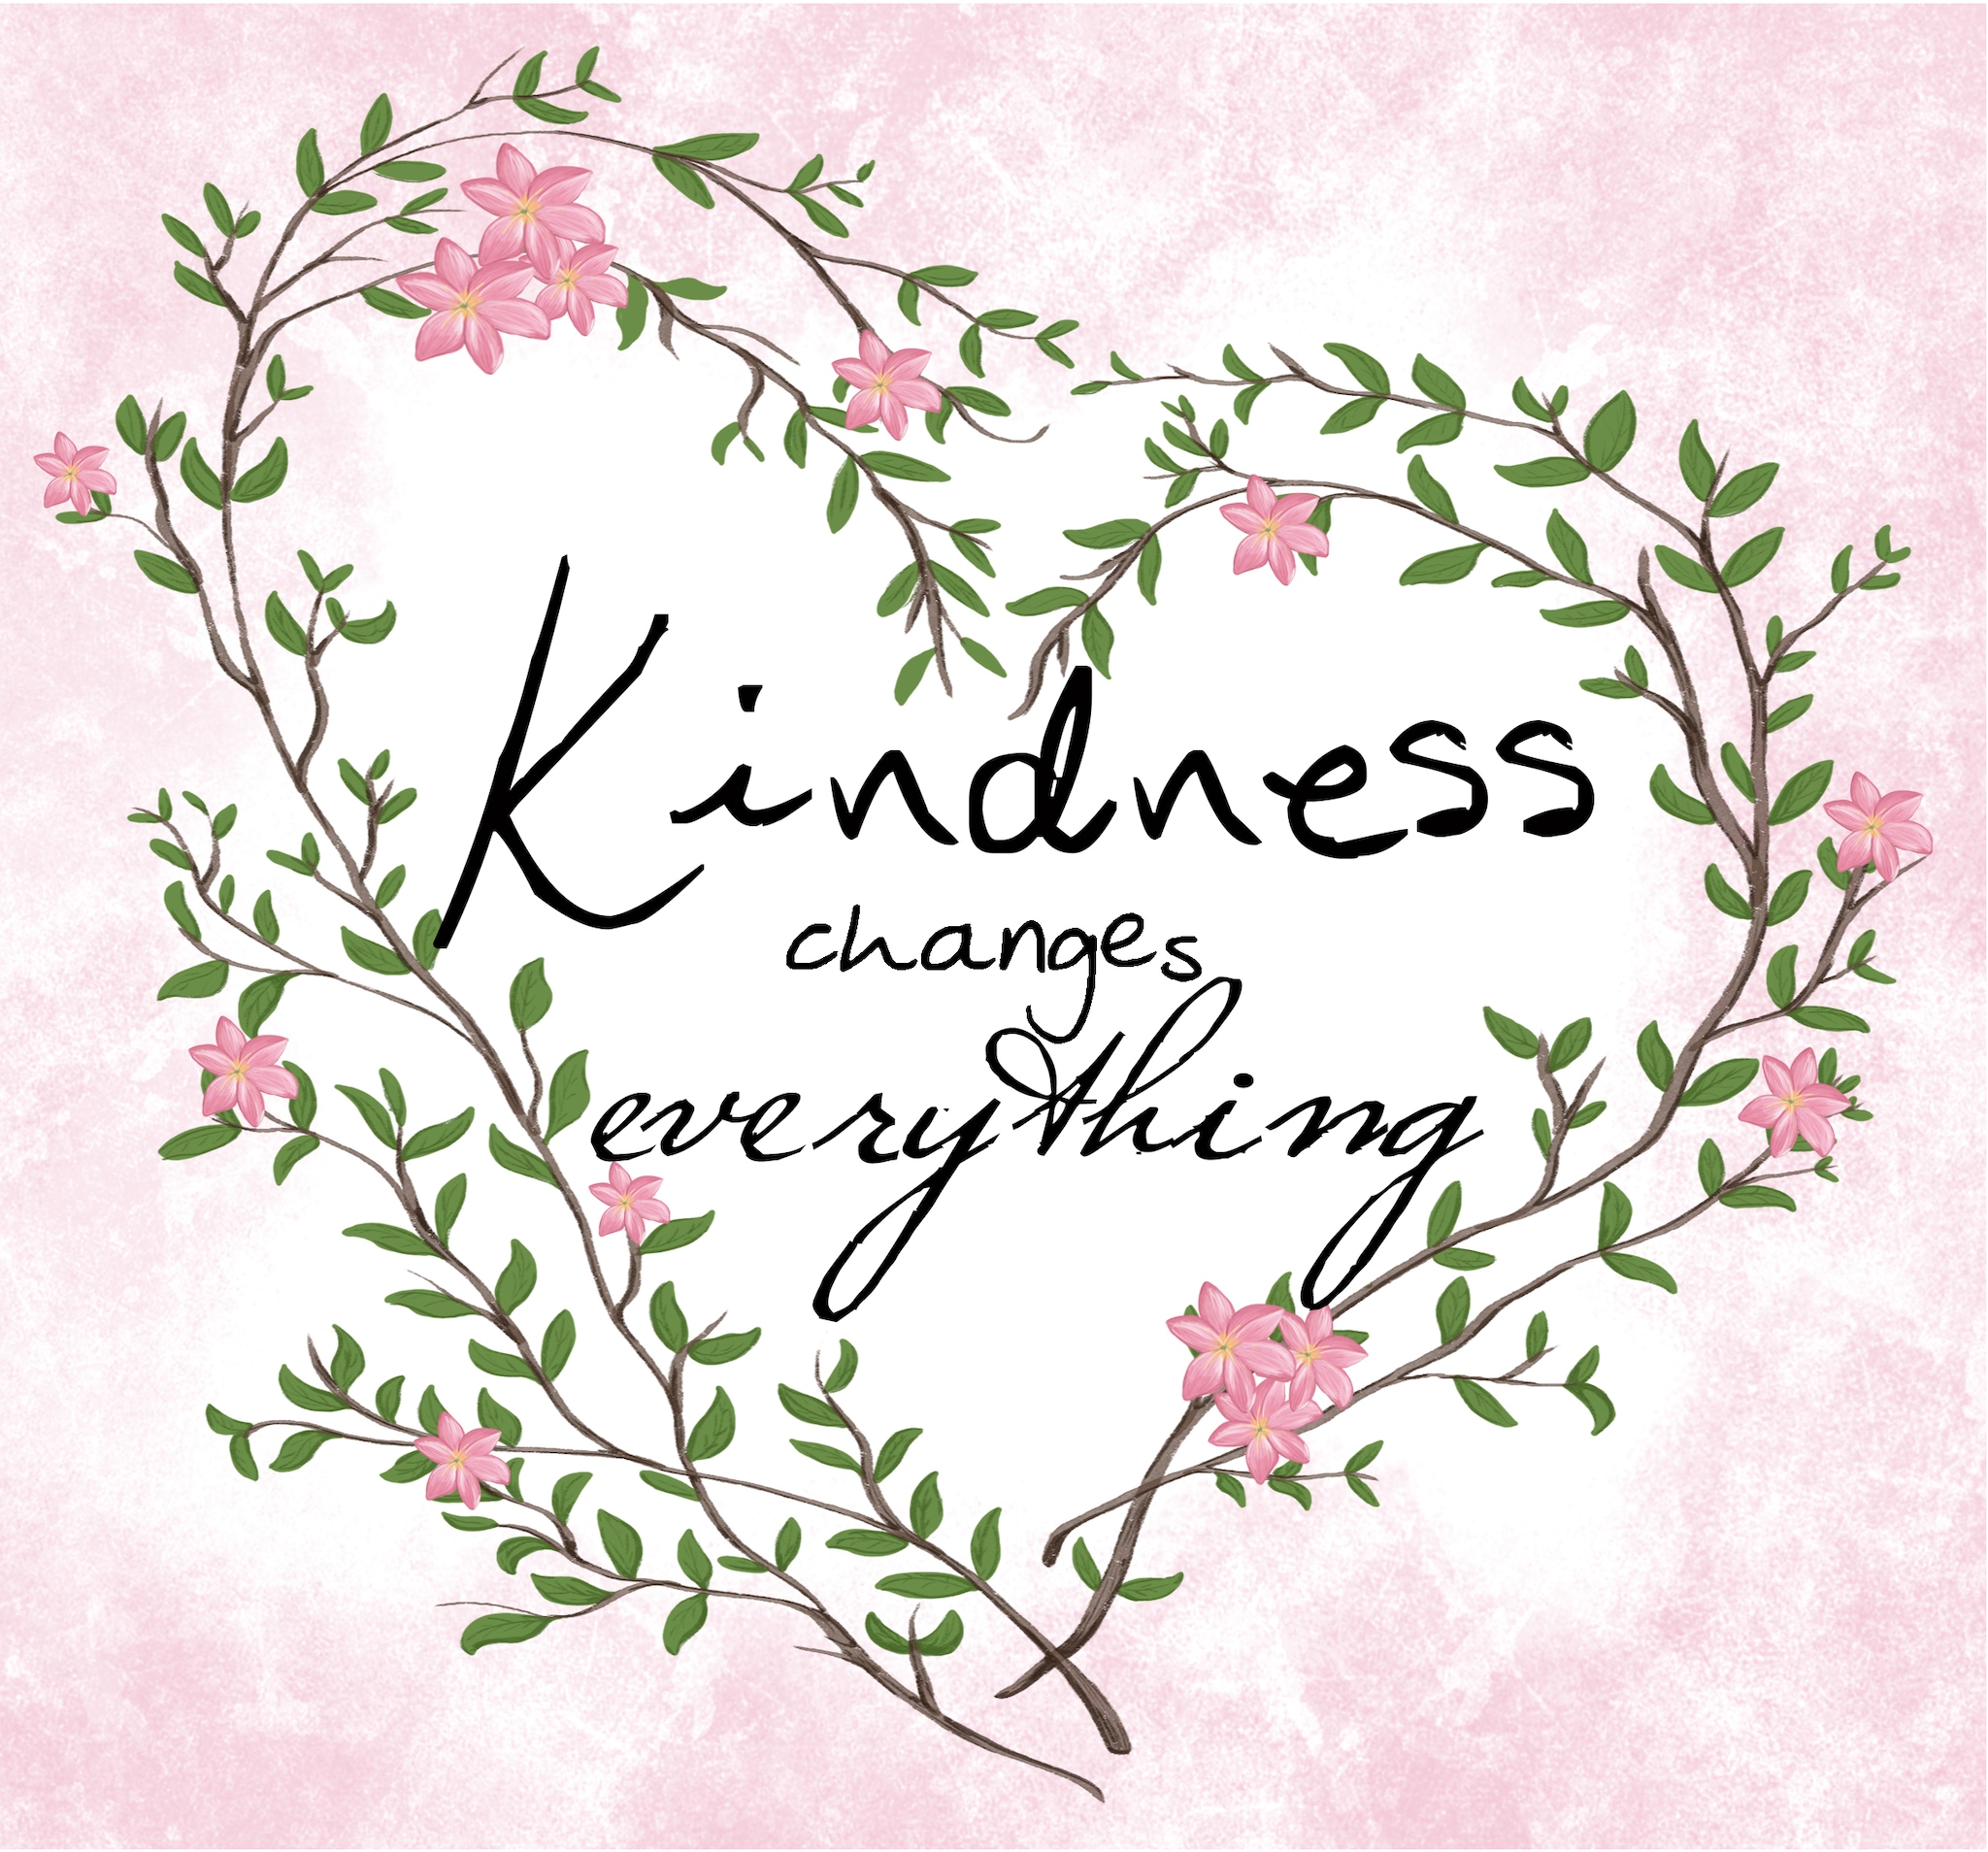 Happy Kindness Day 2021 Wishes Images, Wallpaper, Quotes, Status, Photos, Pics, SMS, Messages. (Image: Shutterstock)